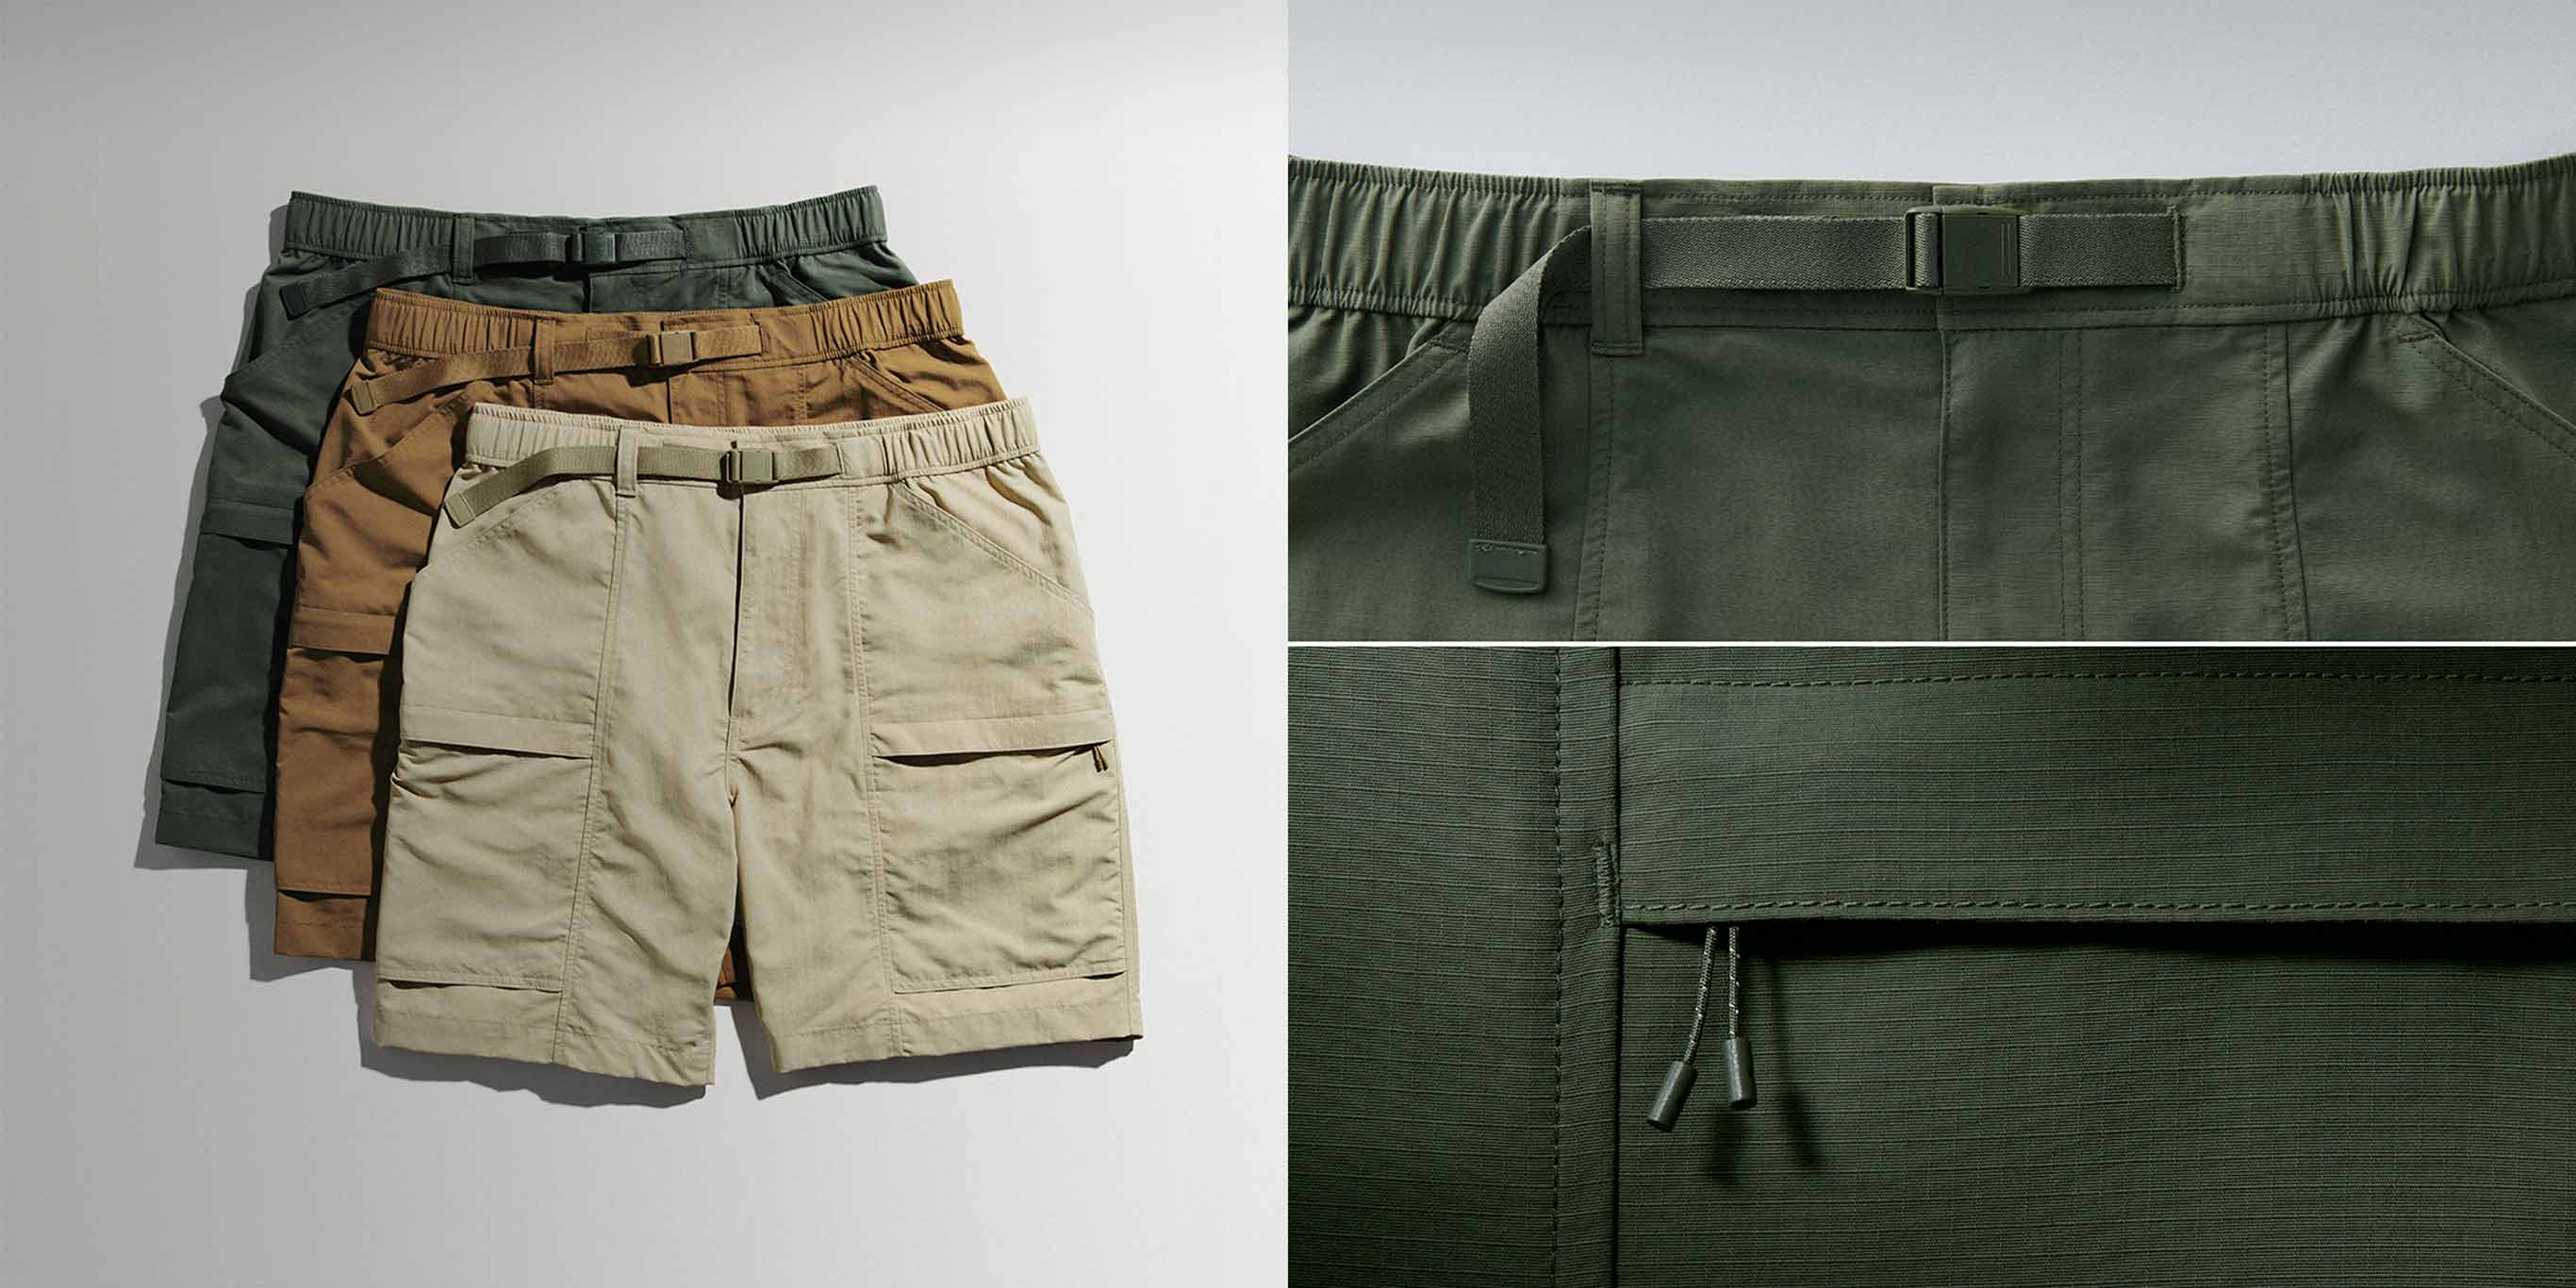 Our shorts collection offers must-haves for 
spring and summer in a range of feels and fits.